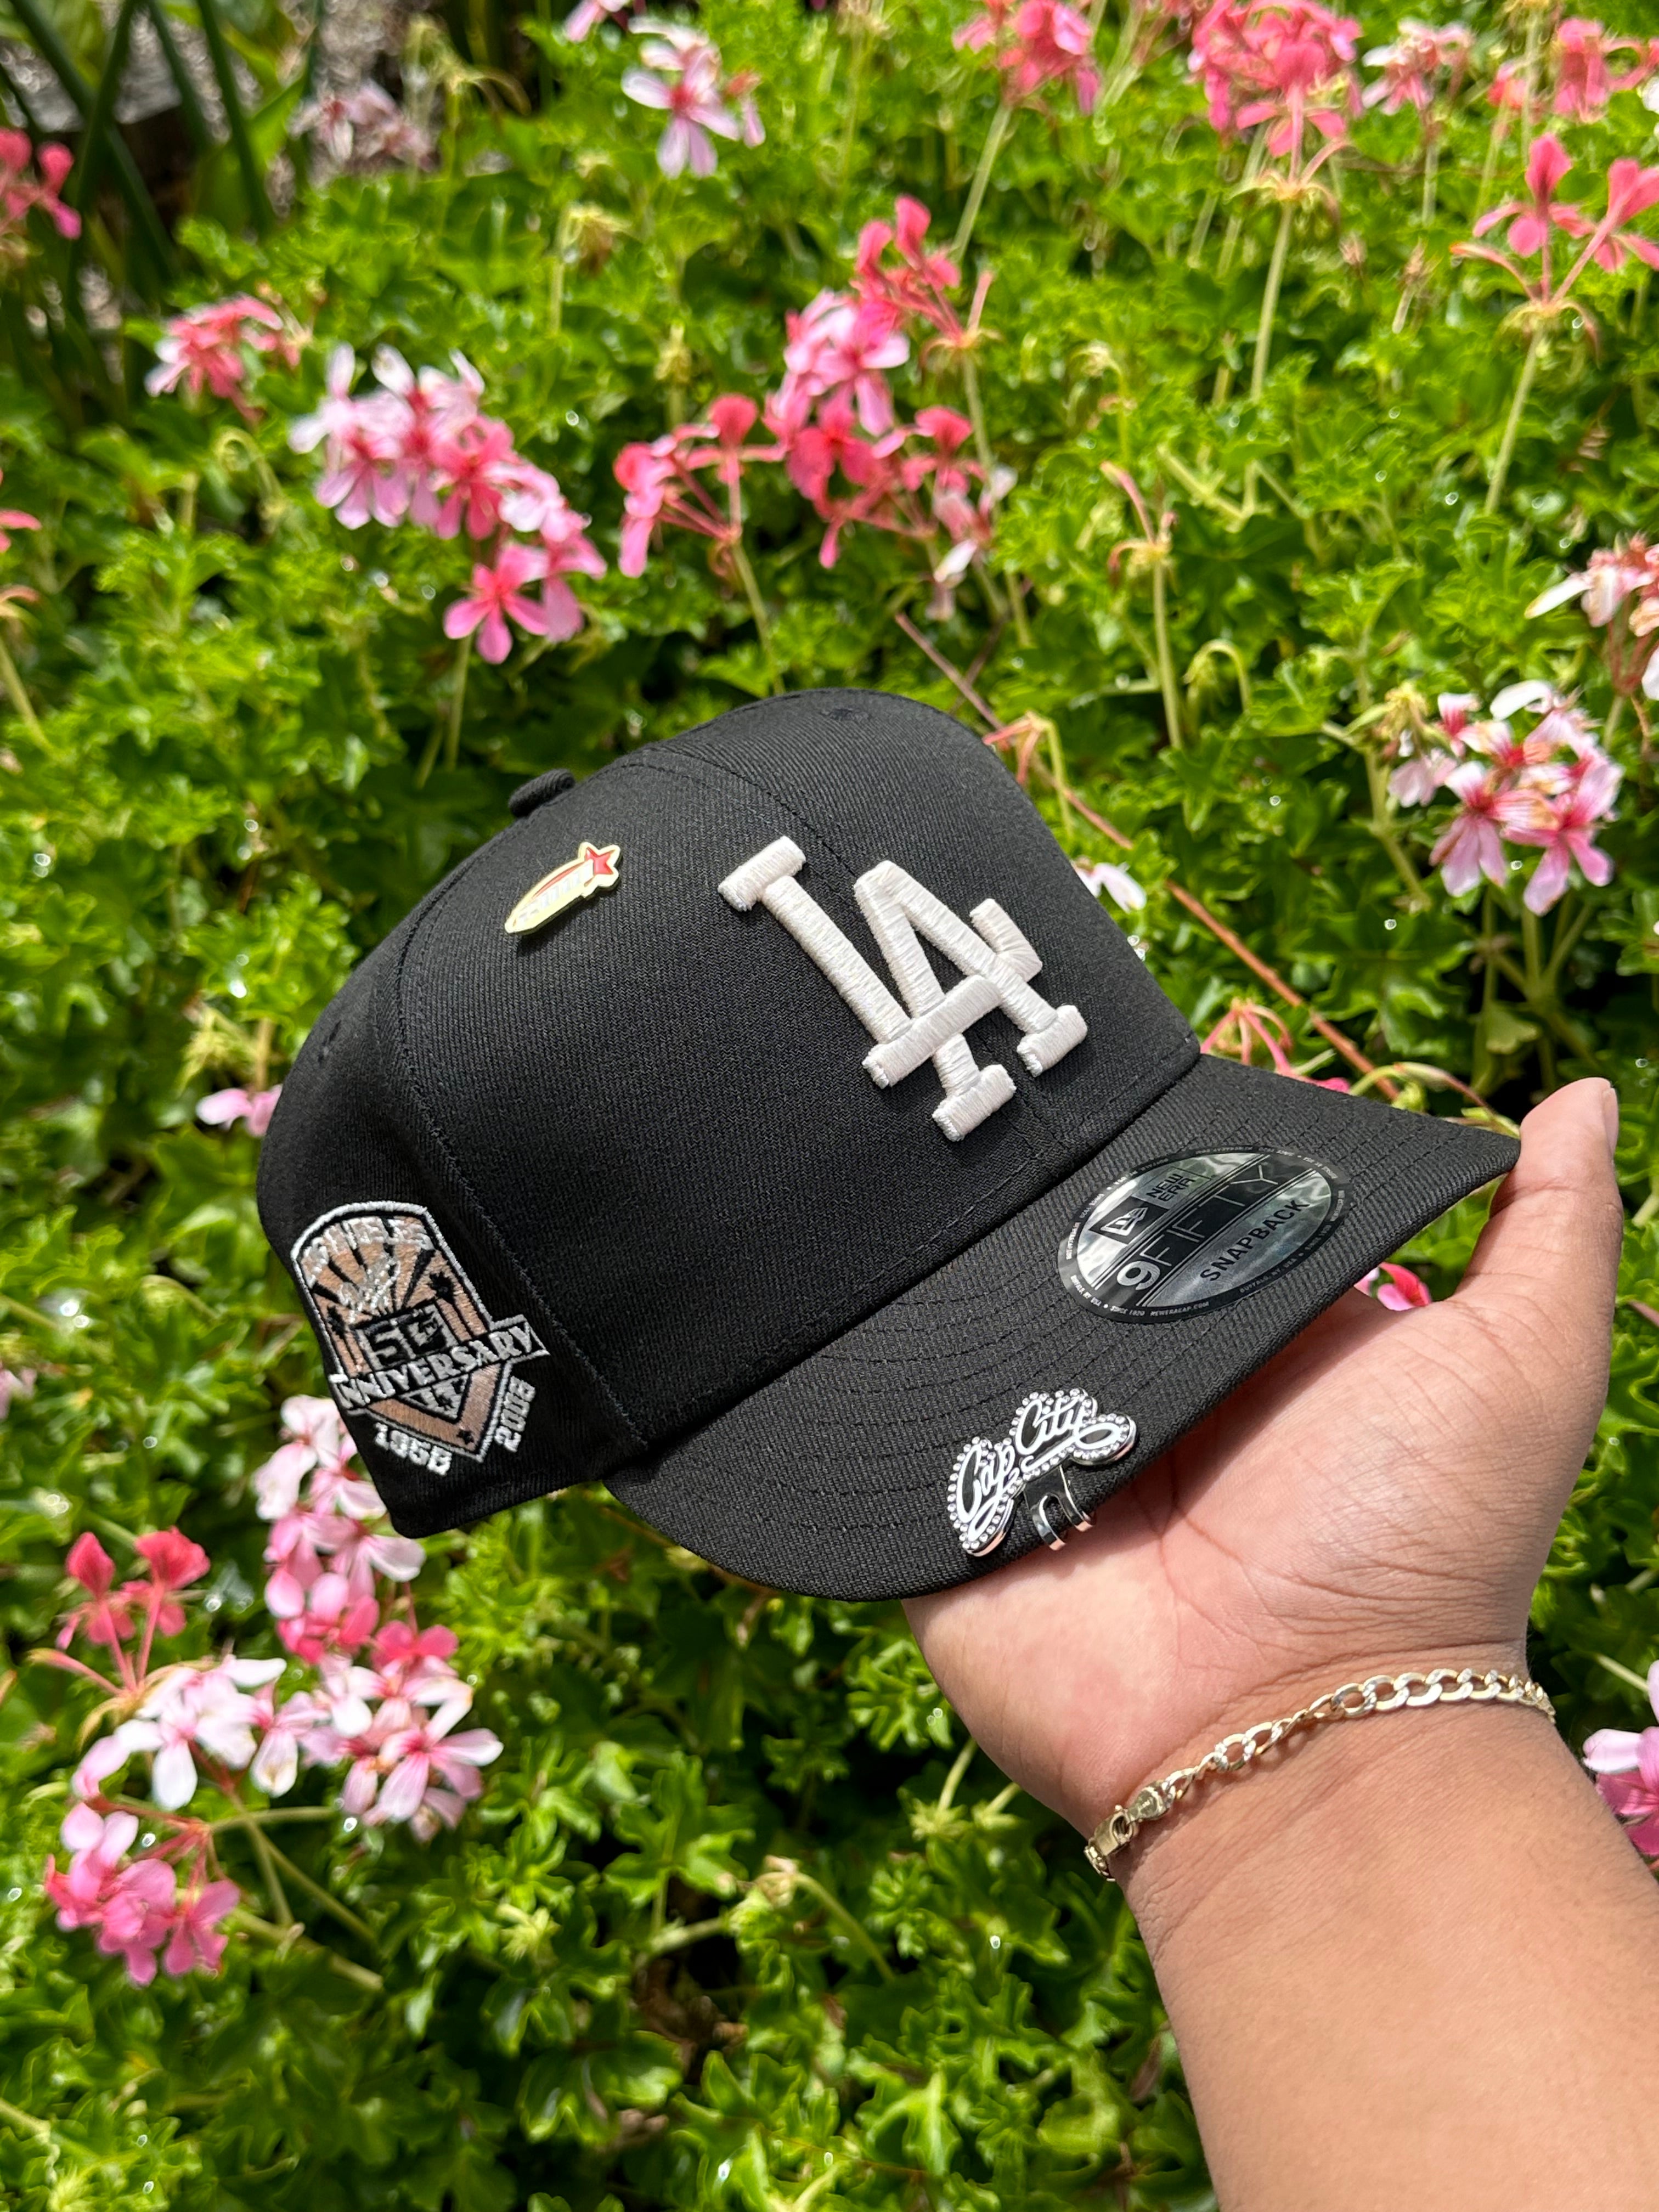 NEW ERA EXCLUSIVE 9FIFTY BLACK LOS ANGELES DODGERS SNAPBACK W/ 50TH ANNIVERSARY PATCH